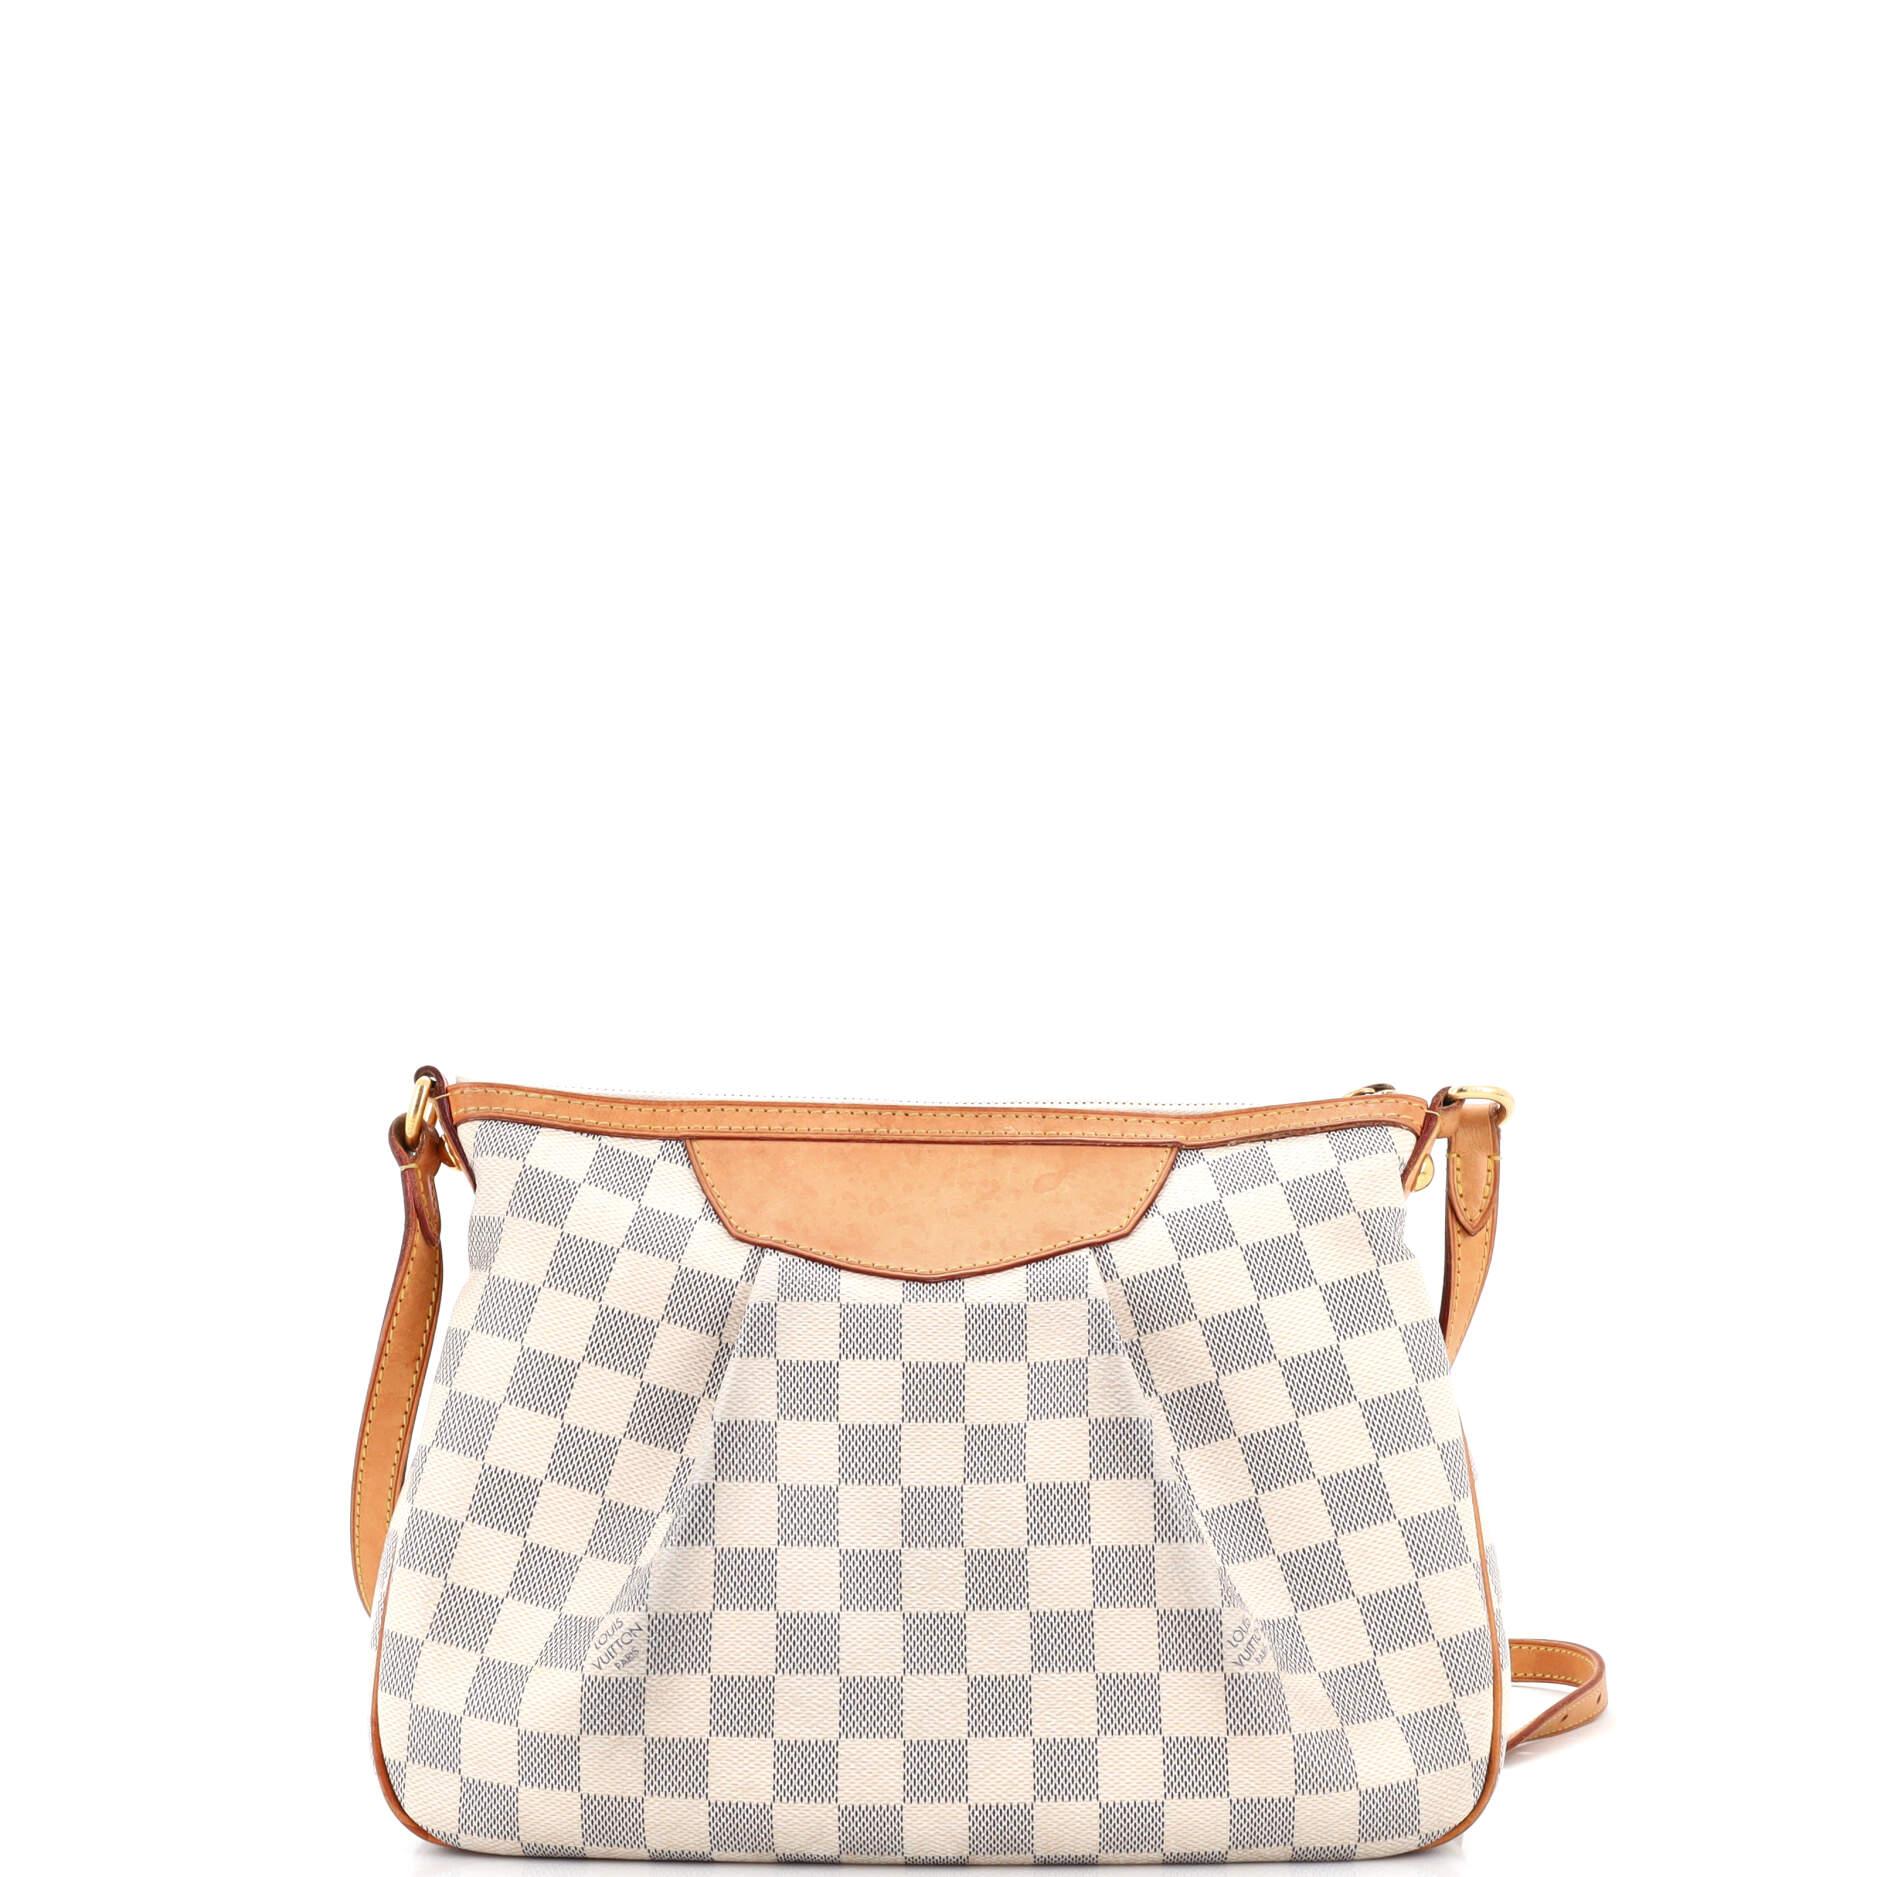 Louis Vuitton Siracusa Handbag Damier PM In Fair Condition For Sale In NY, NY